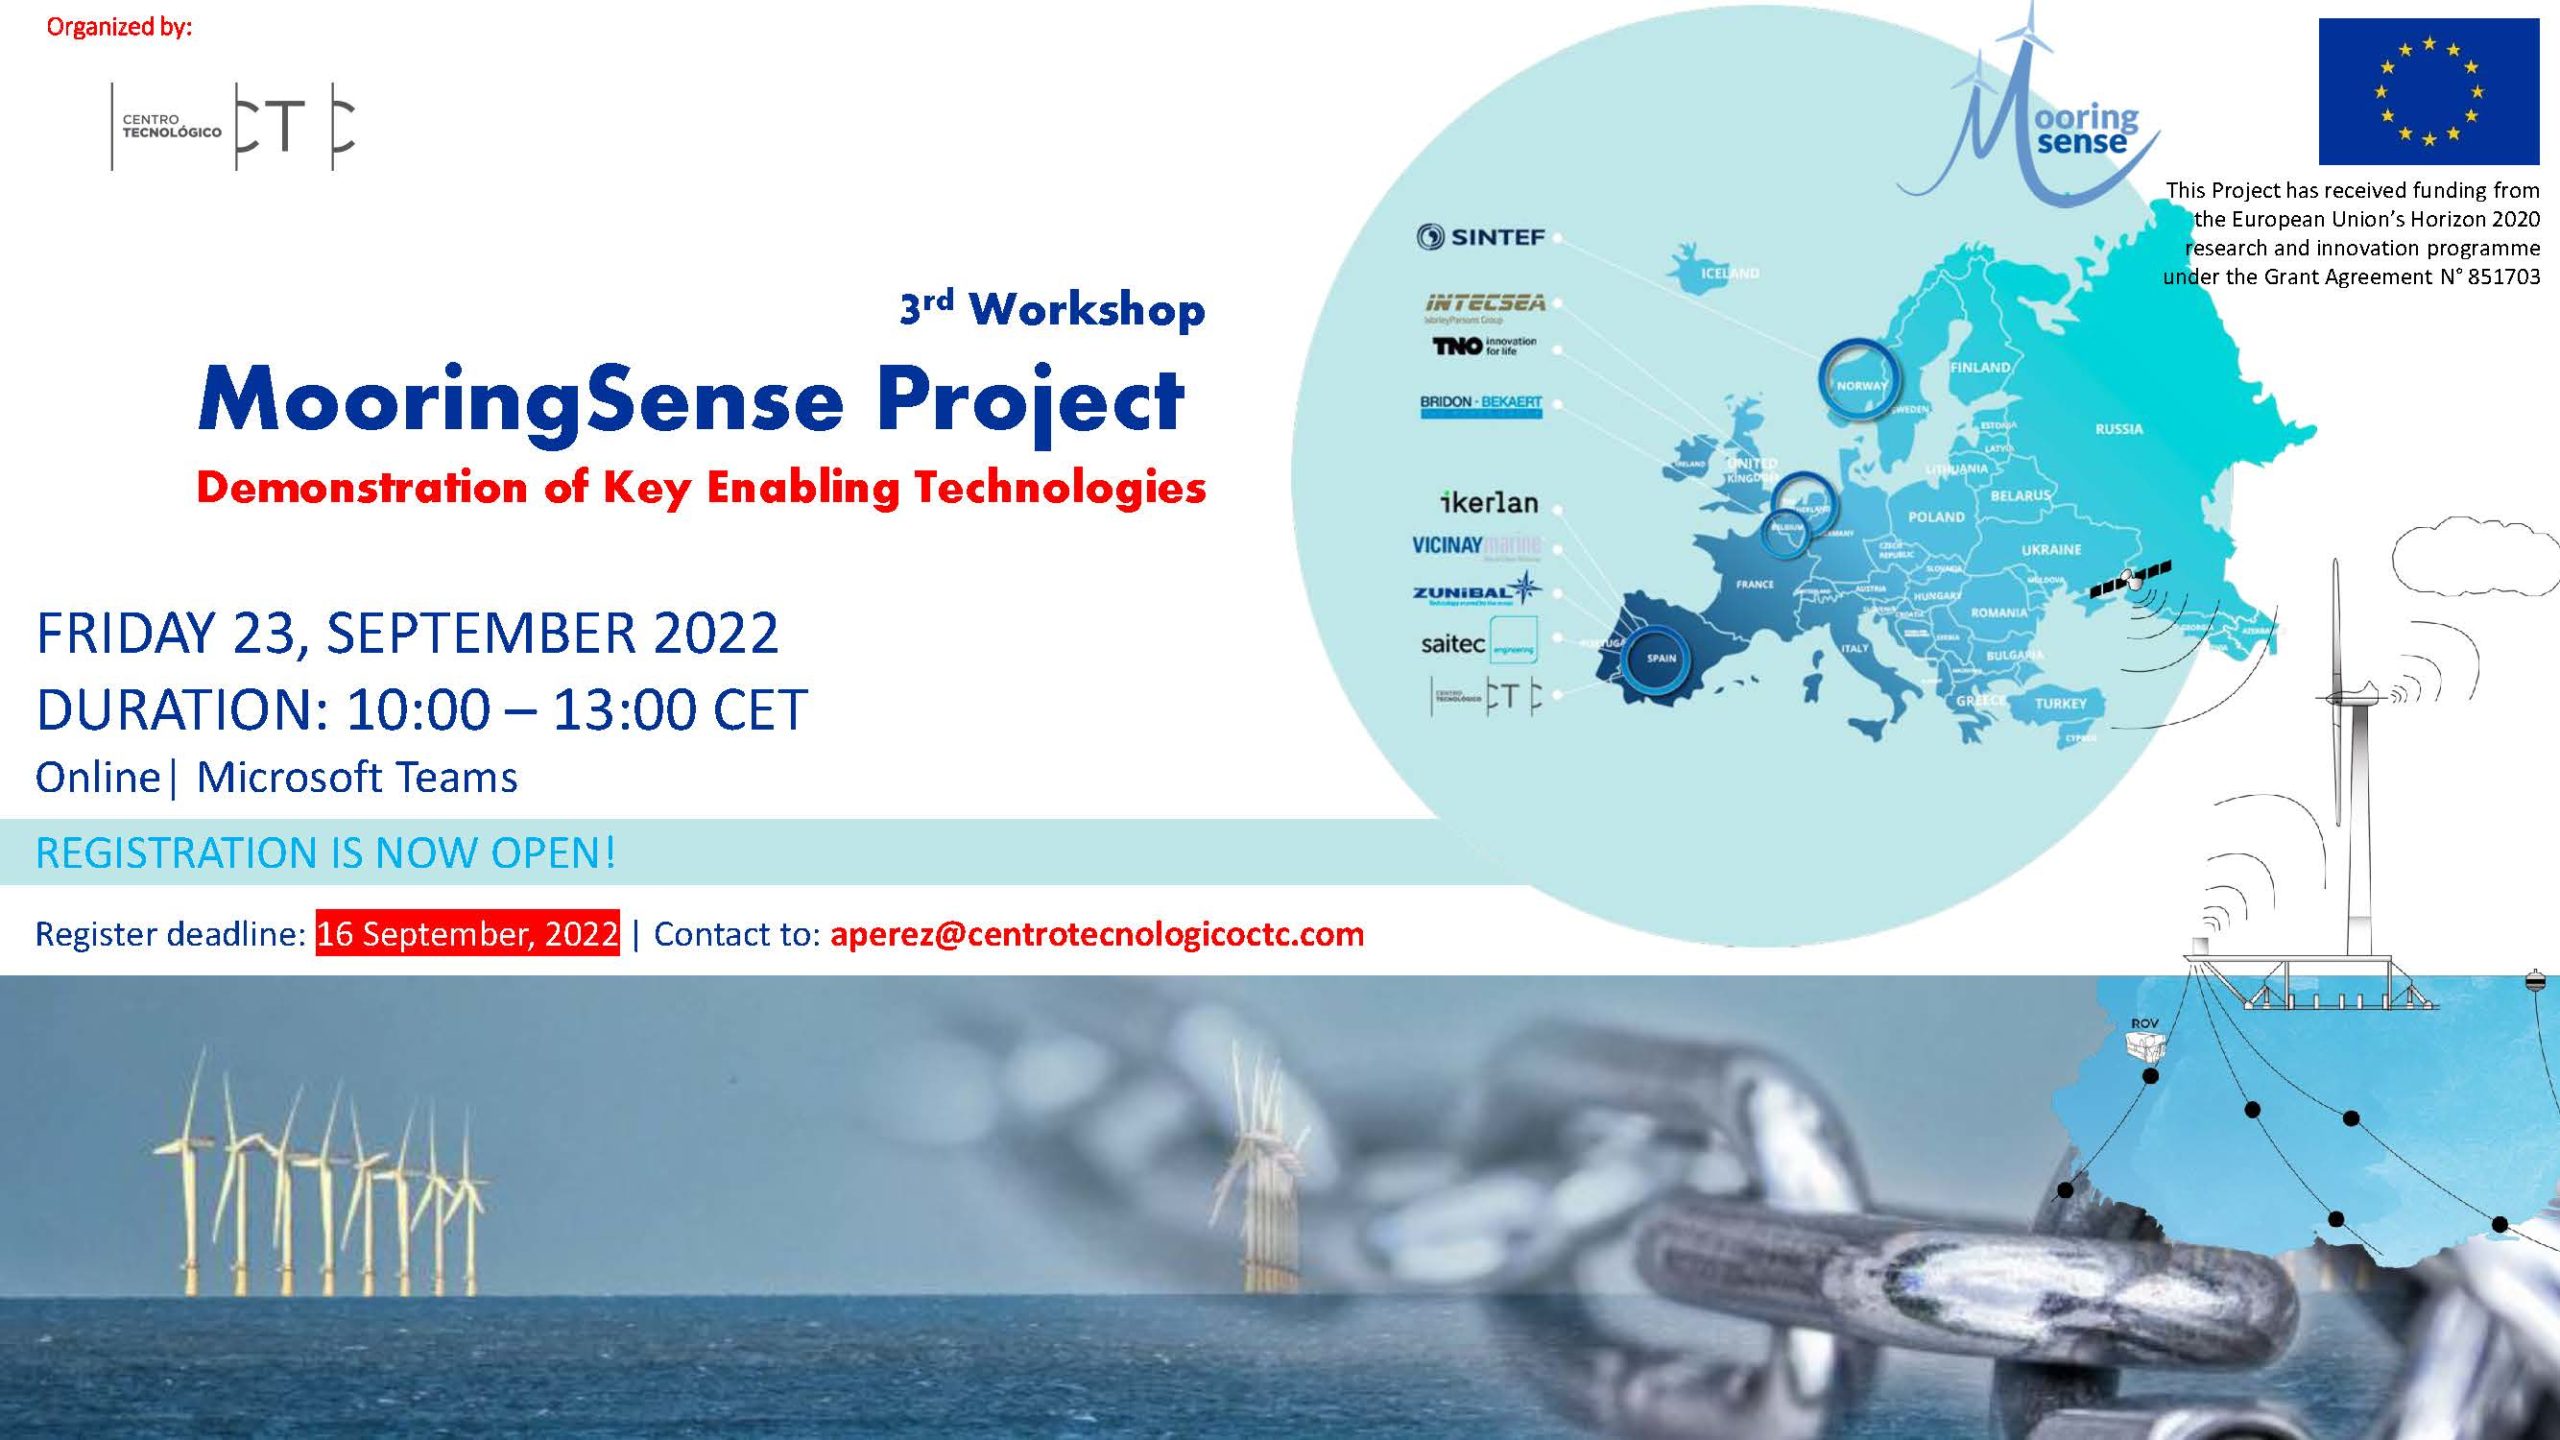 The MooringSense consortium demonstrates the project’s technologies to half a hundred international experts